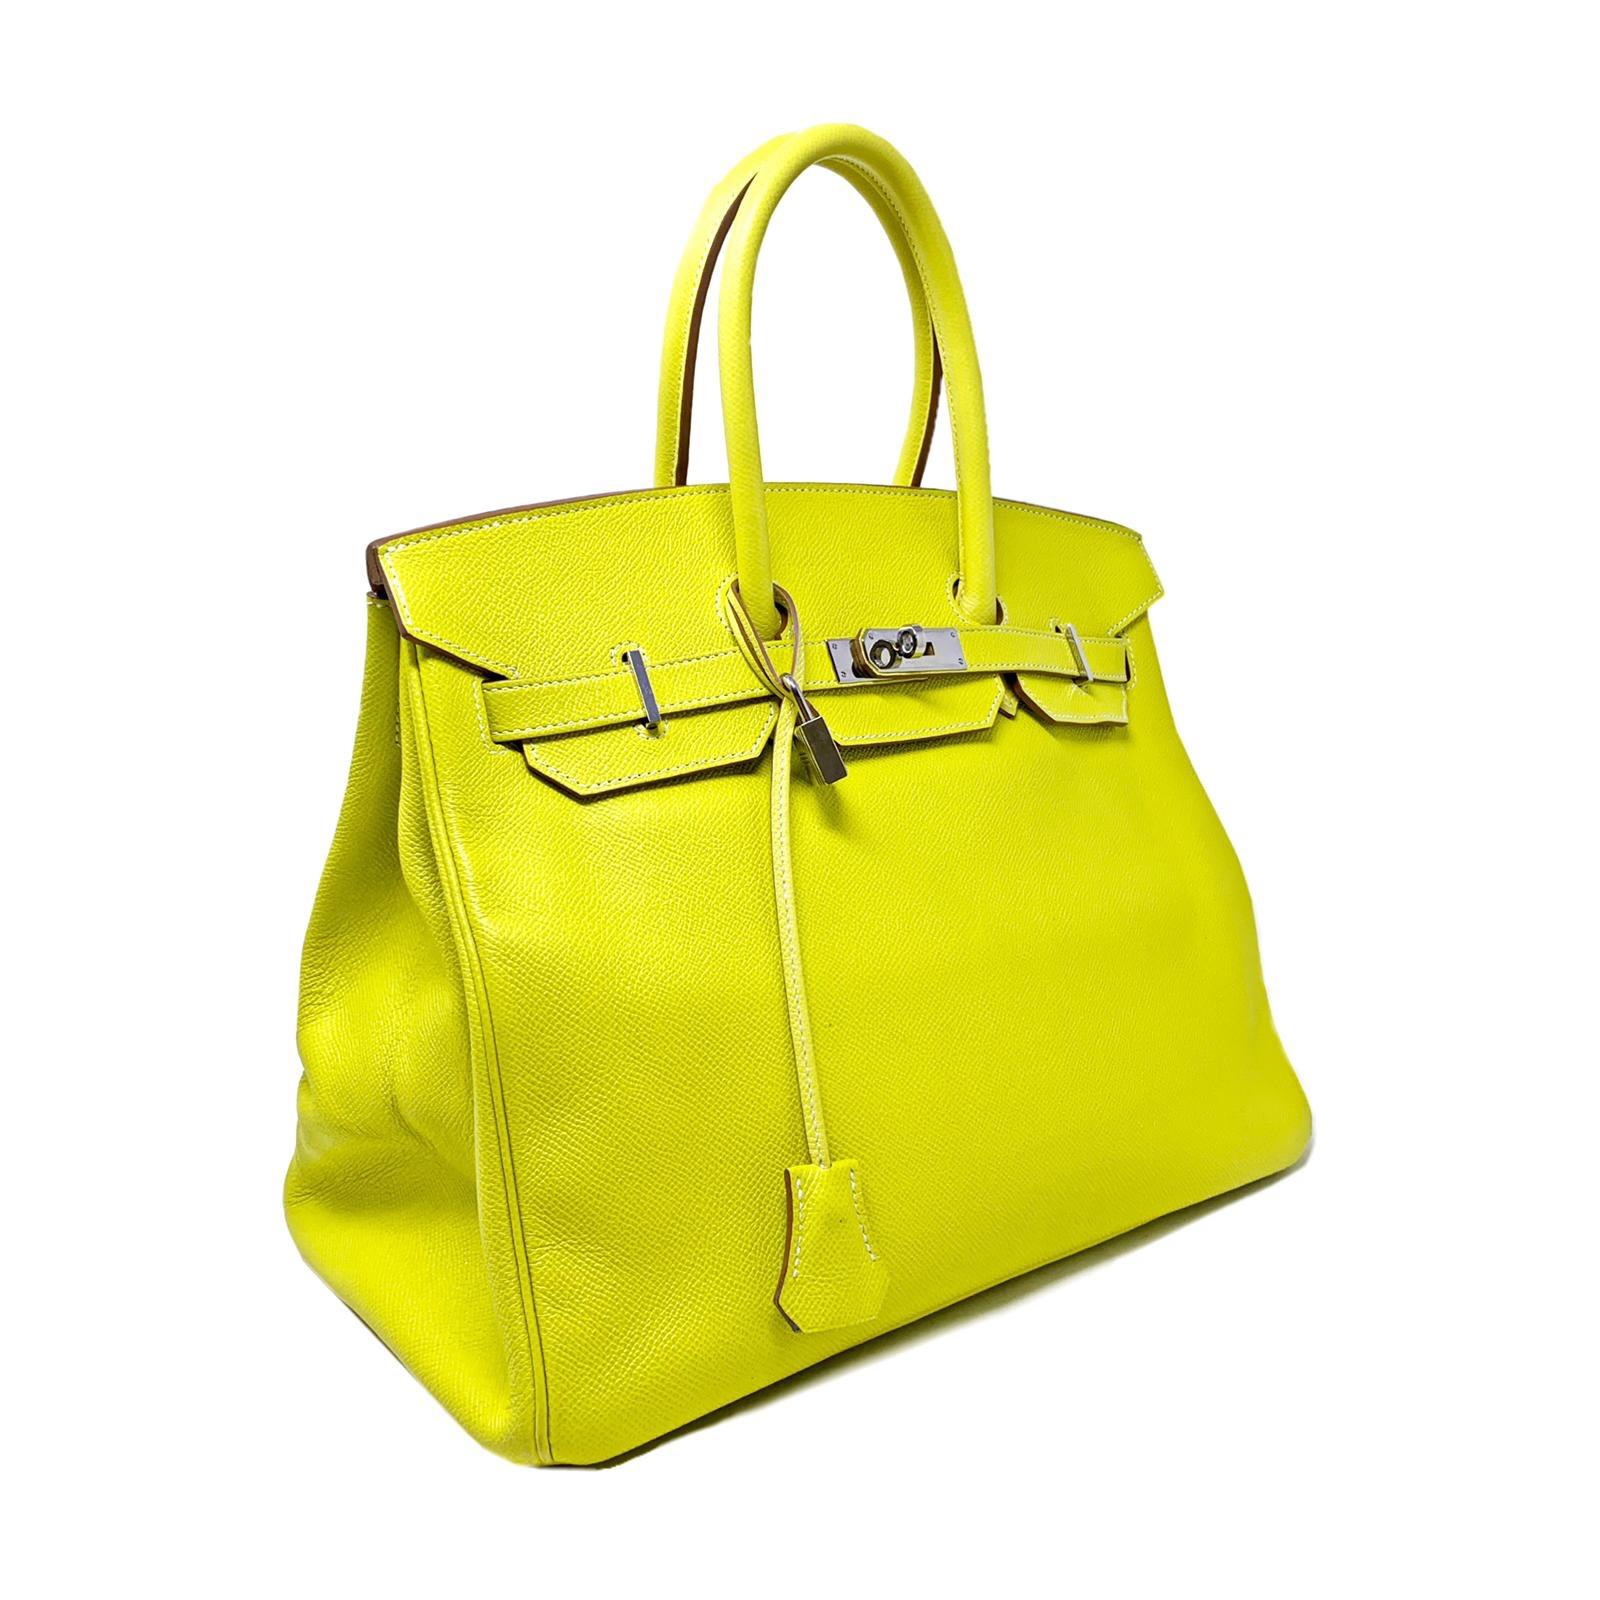 Hermes Paris Sac Birkin size 35 In Epsom lime color. Year of production 2000 Good condition Complete with key lock clochette and dust-bag. 
Has small signs. 